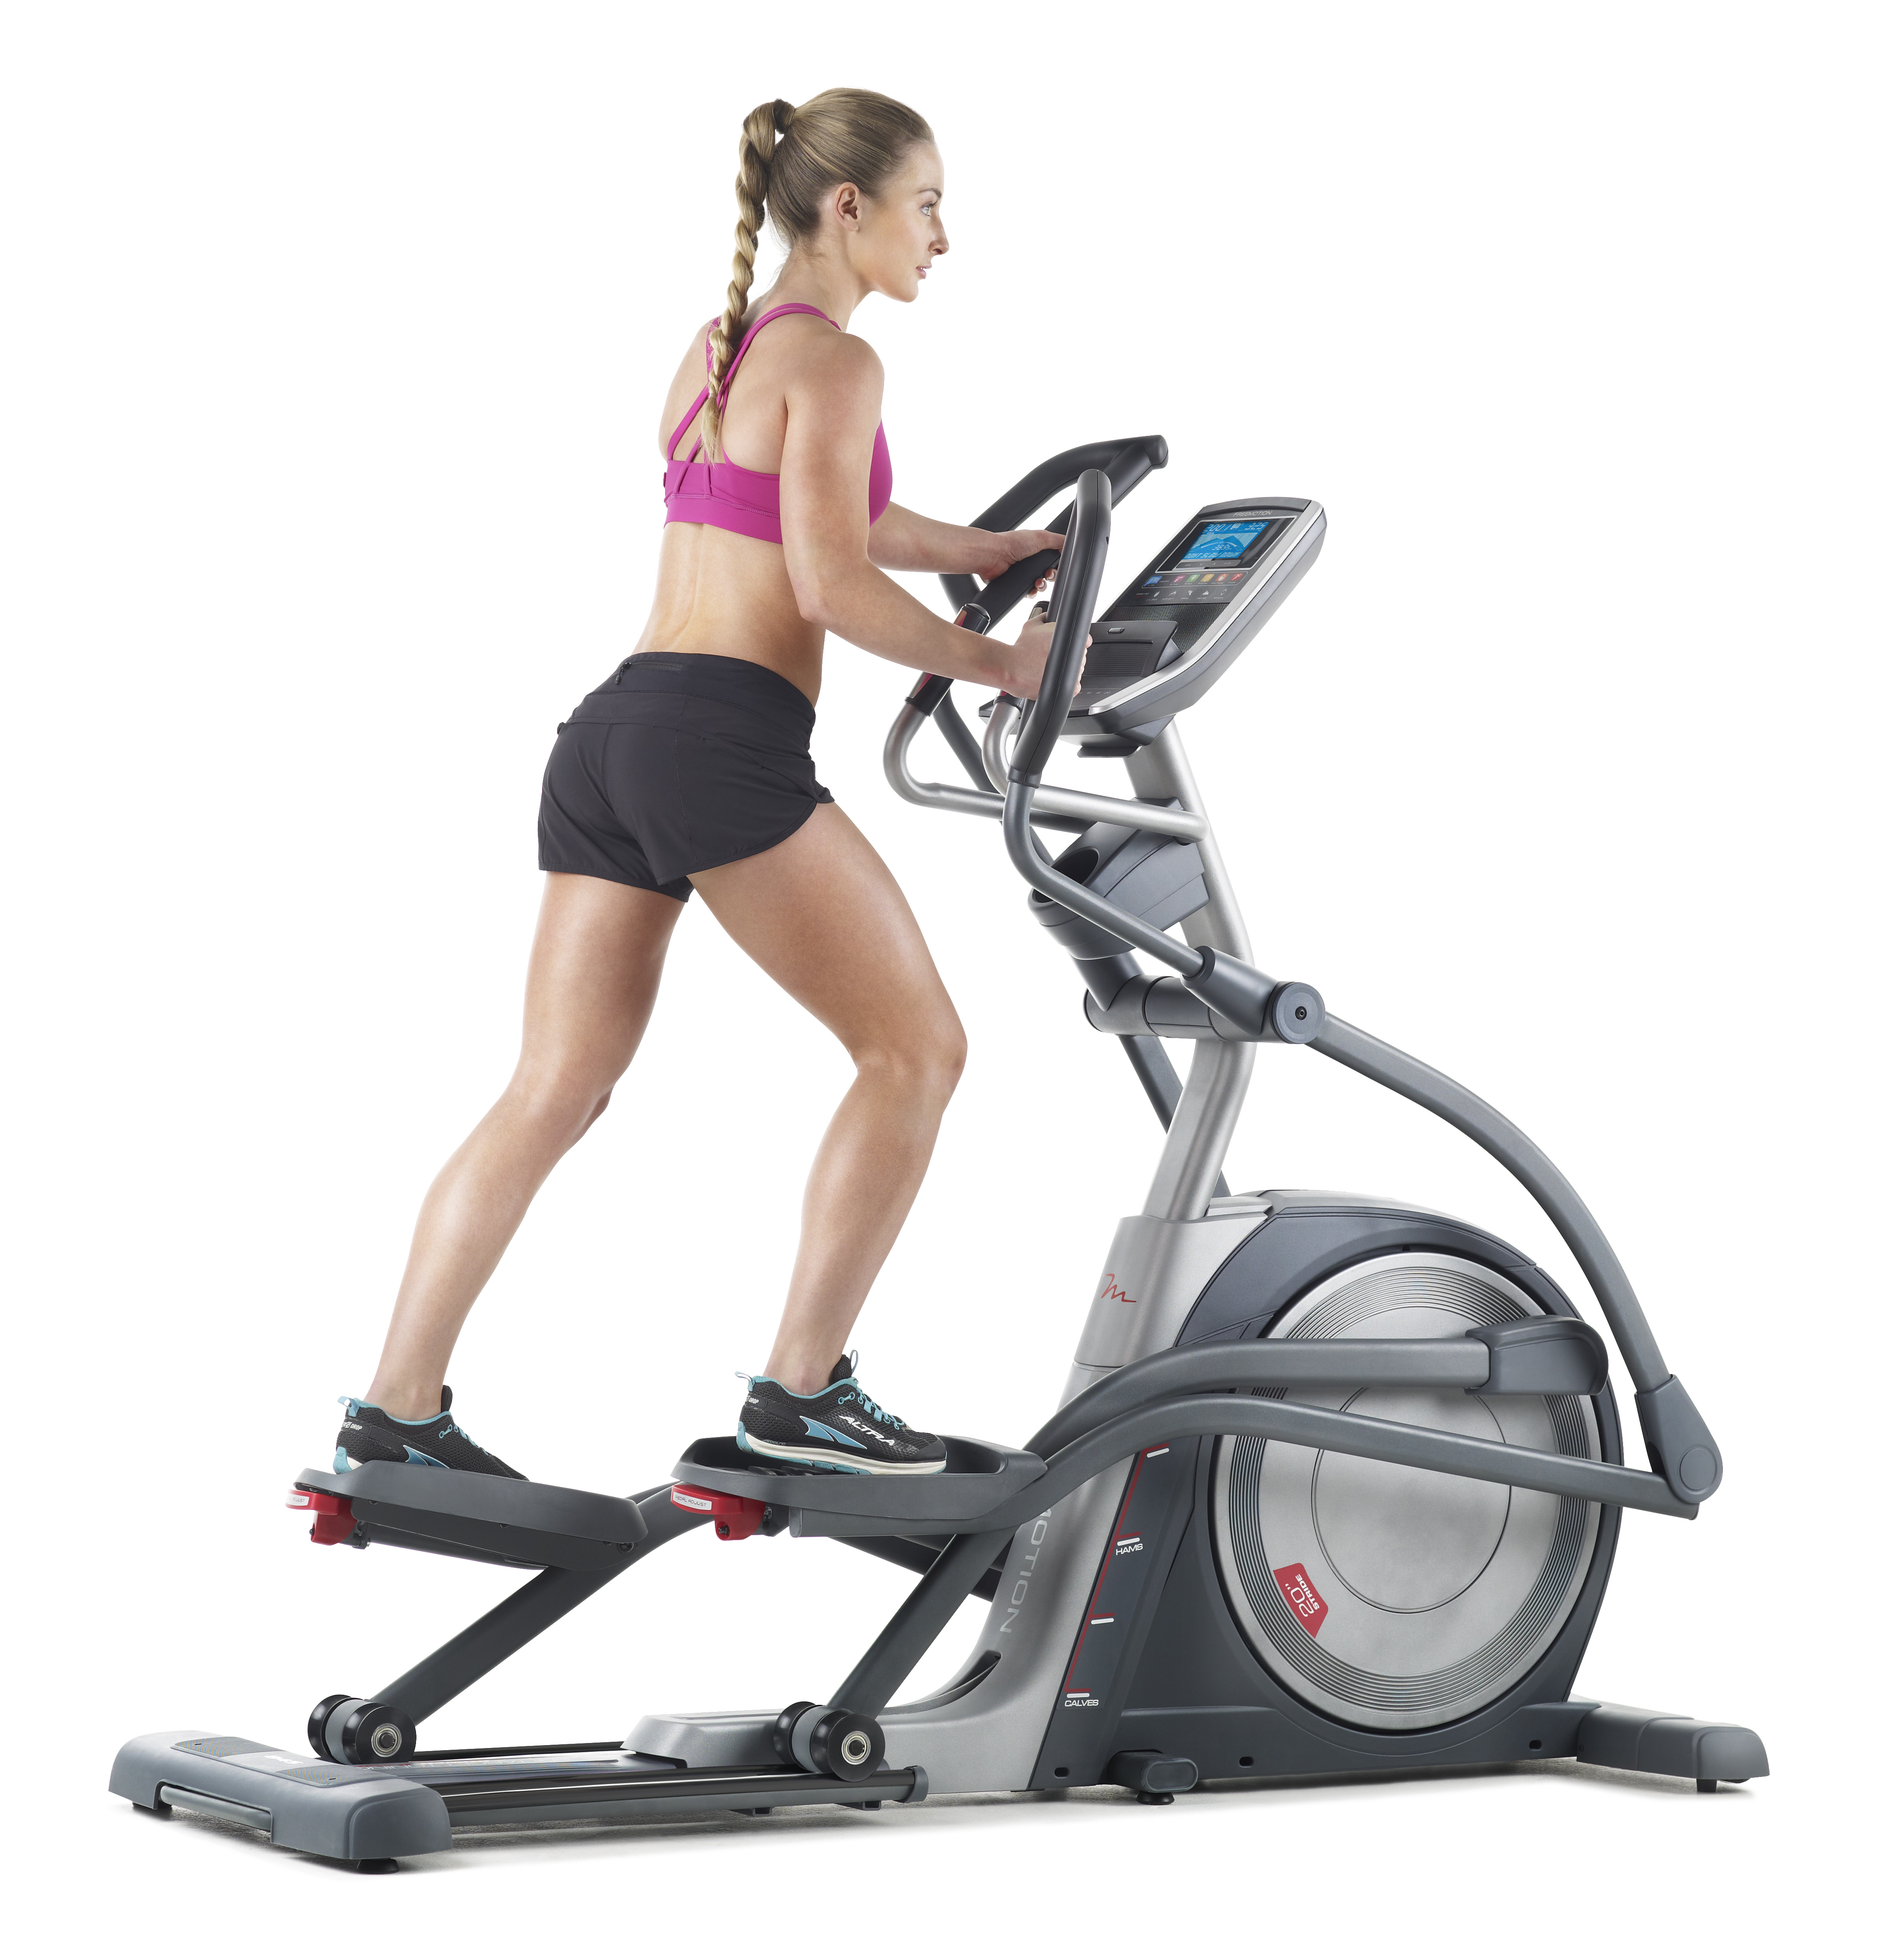 Freemotion 645 Commercial Grade Elliptical with Adjustable Incline - image 4 of 6